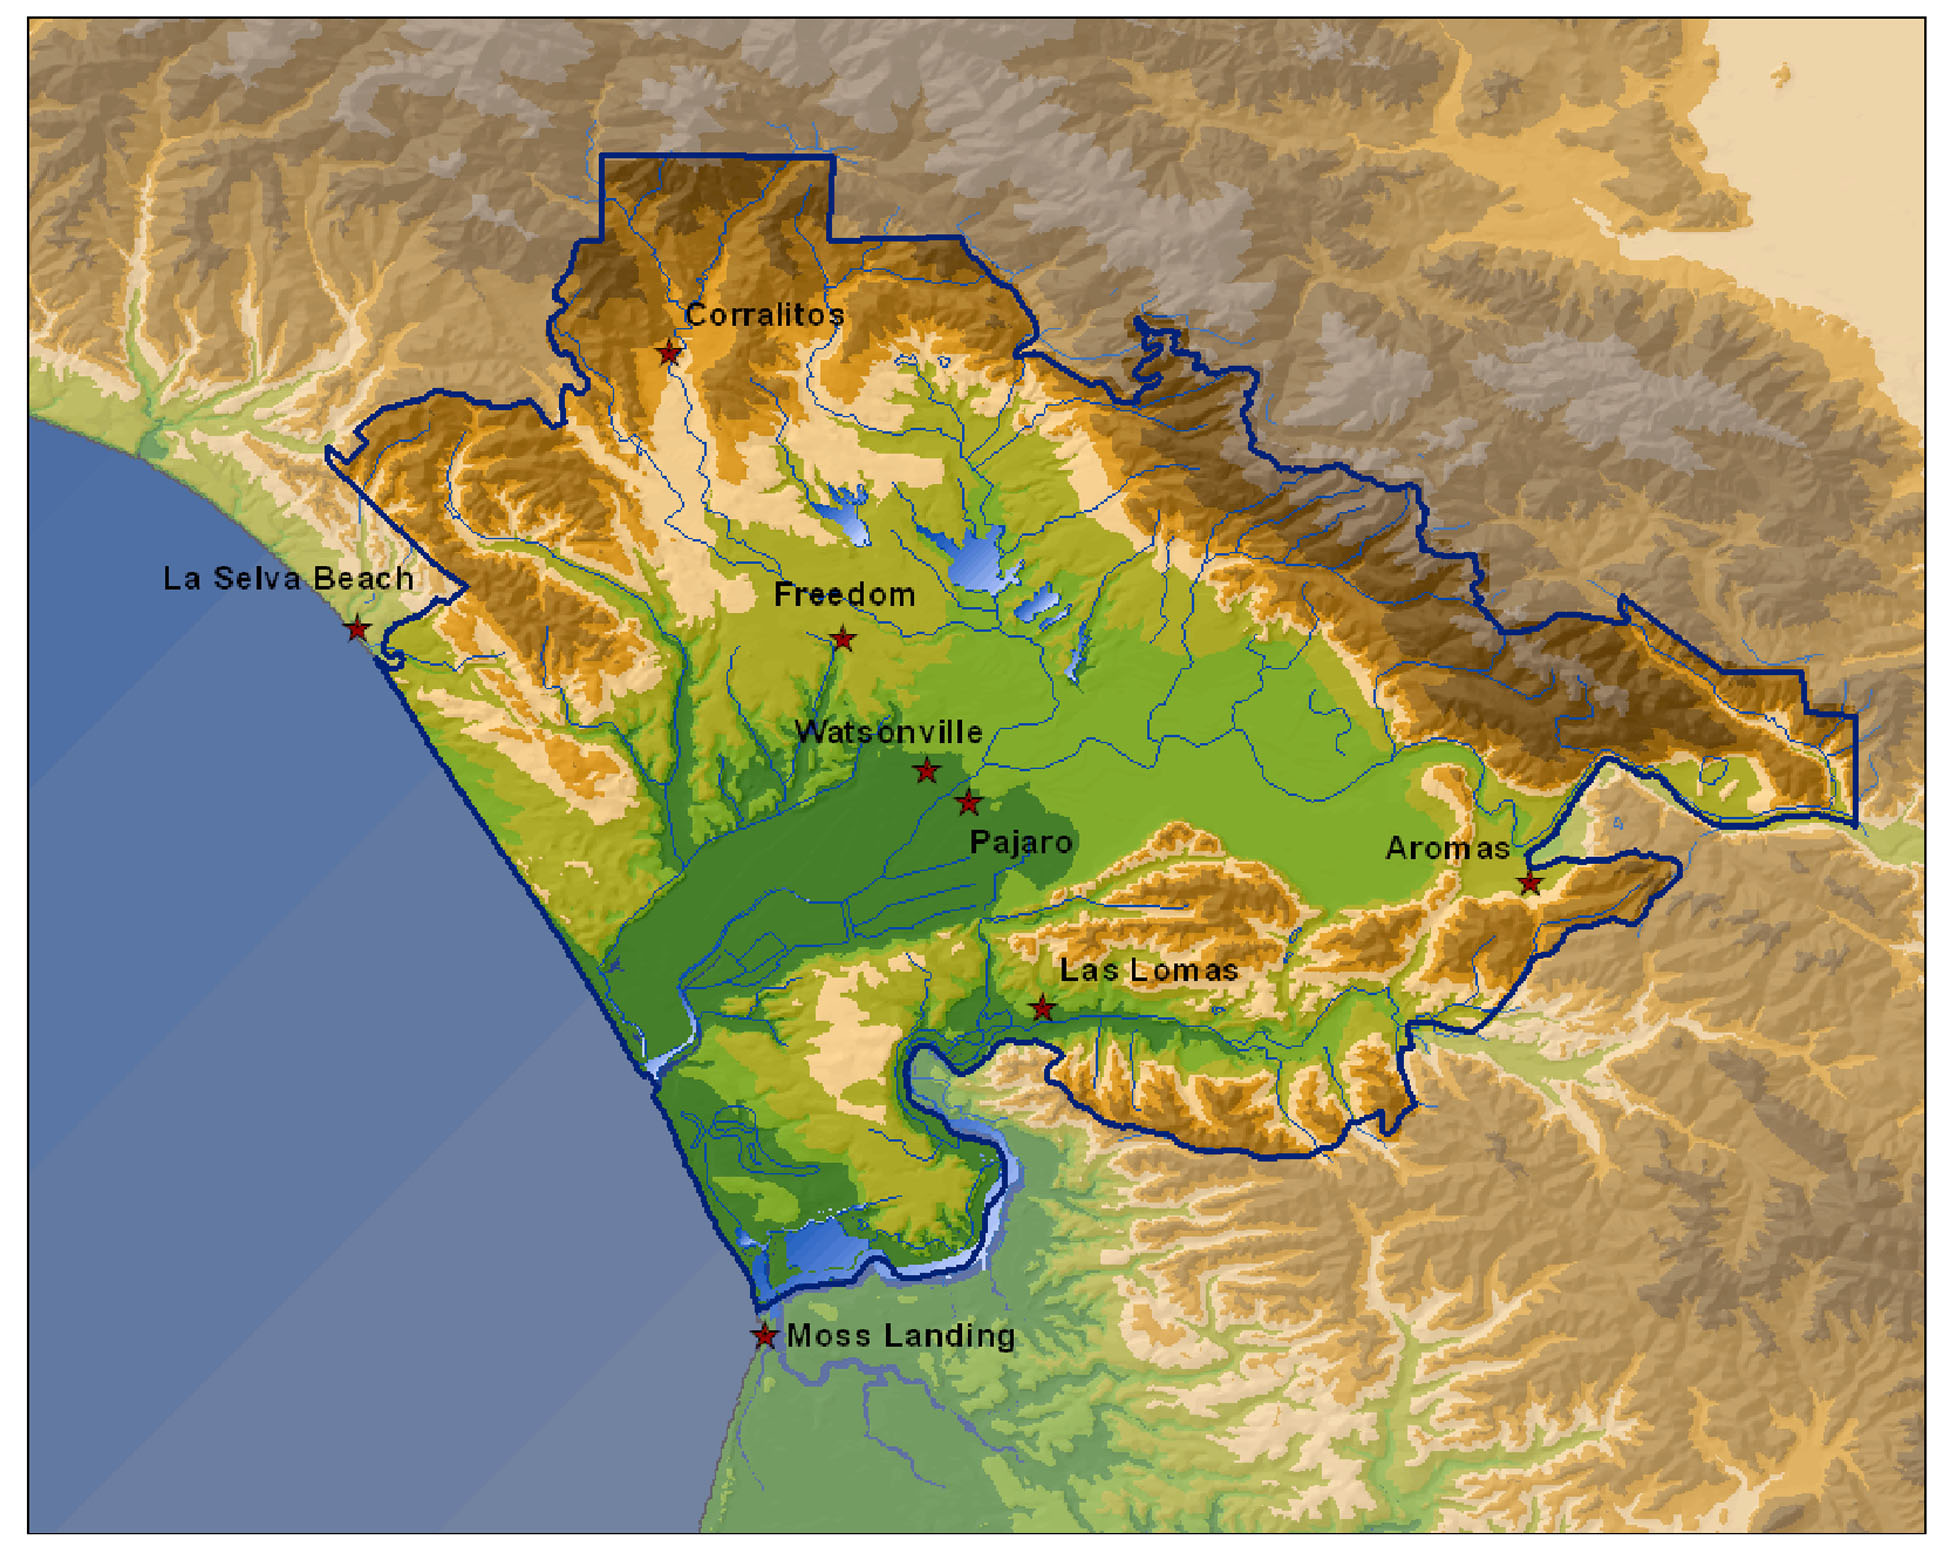 Boundaries of Pajaro Valley copied from the PVWMA Revised Basin Management Plan  [1]